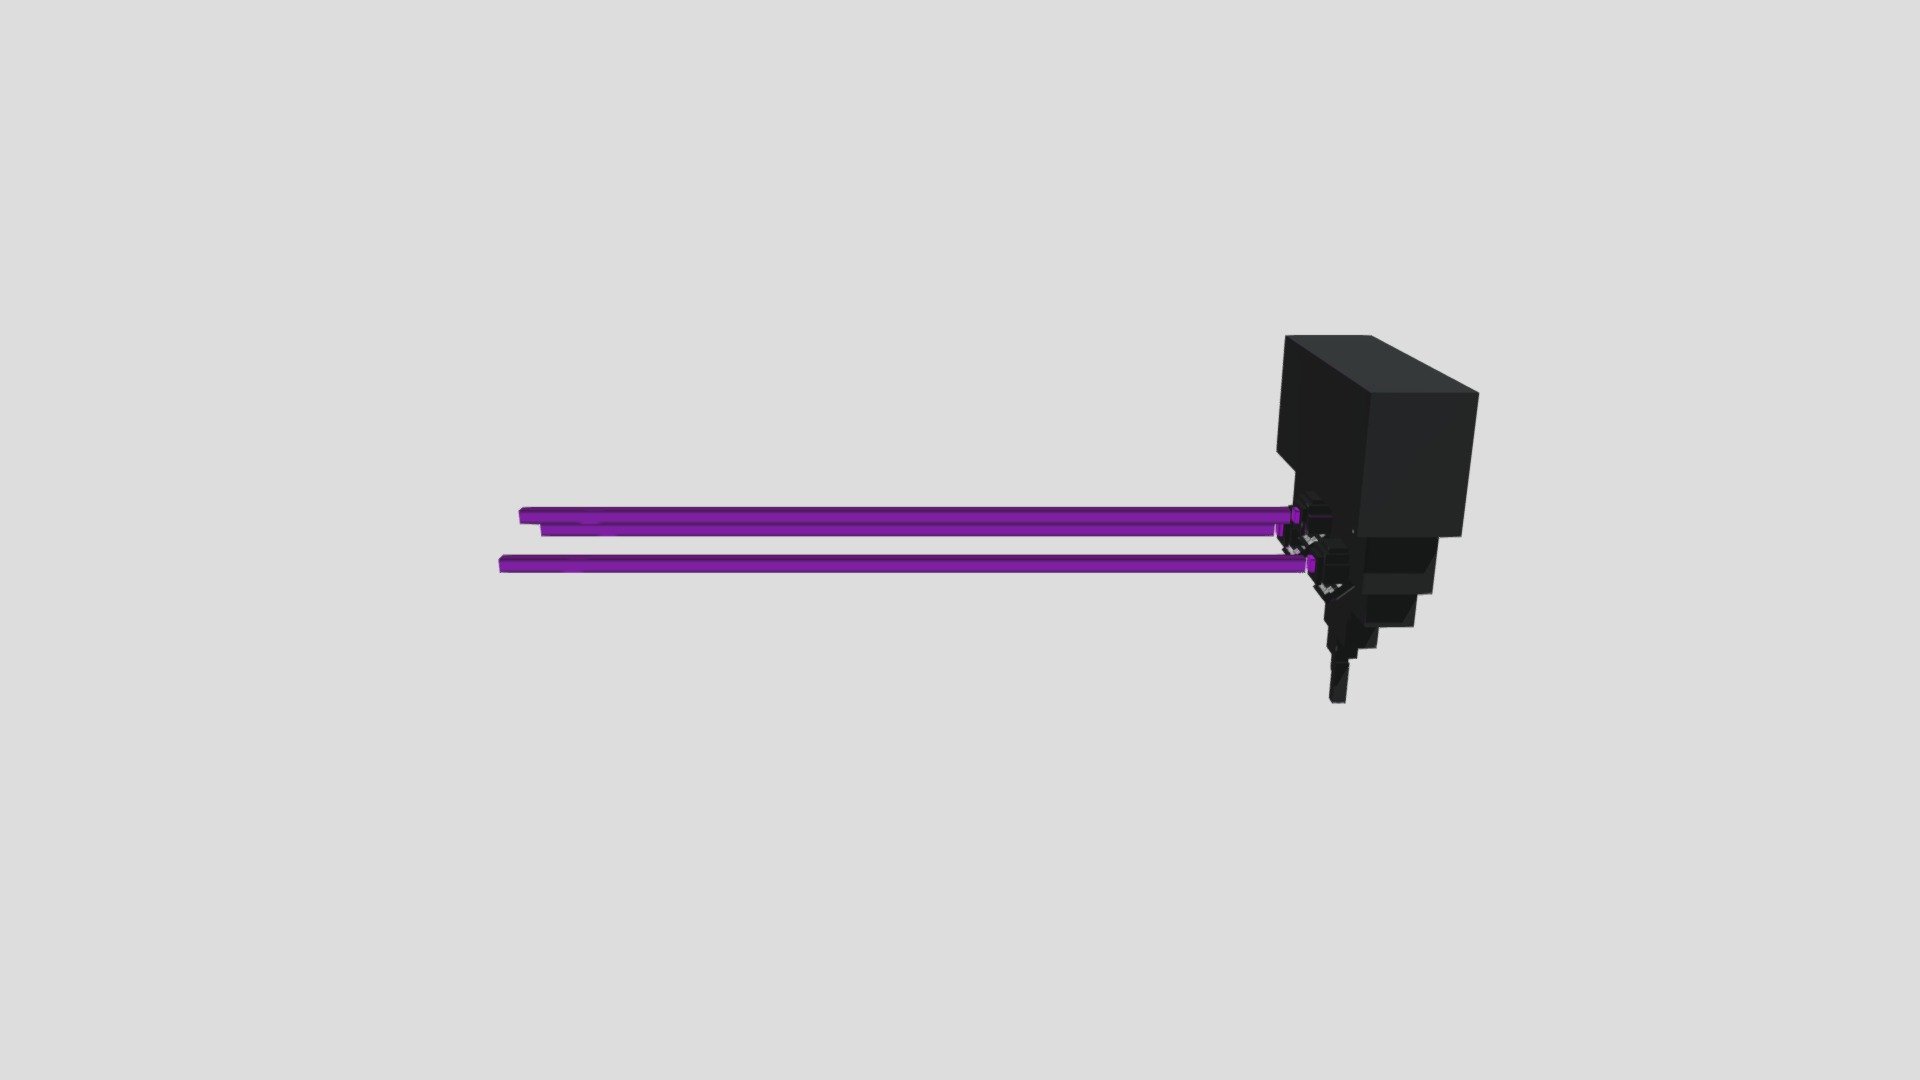 Wither storm phase 4 - Download Free 3D model by A-human-being  (@modle.maker21) [fe7431b]